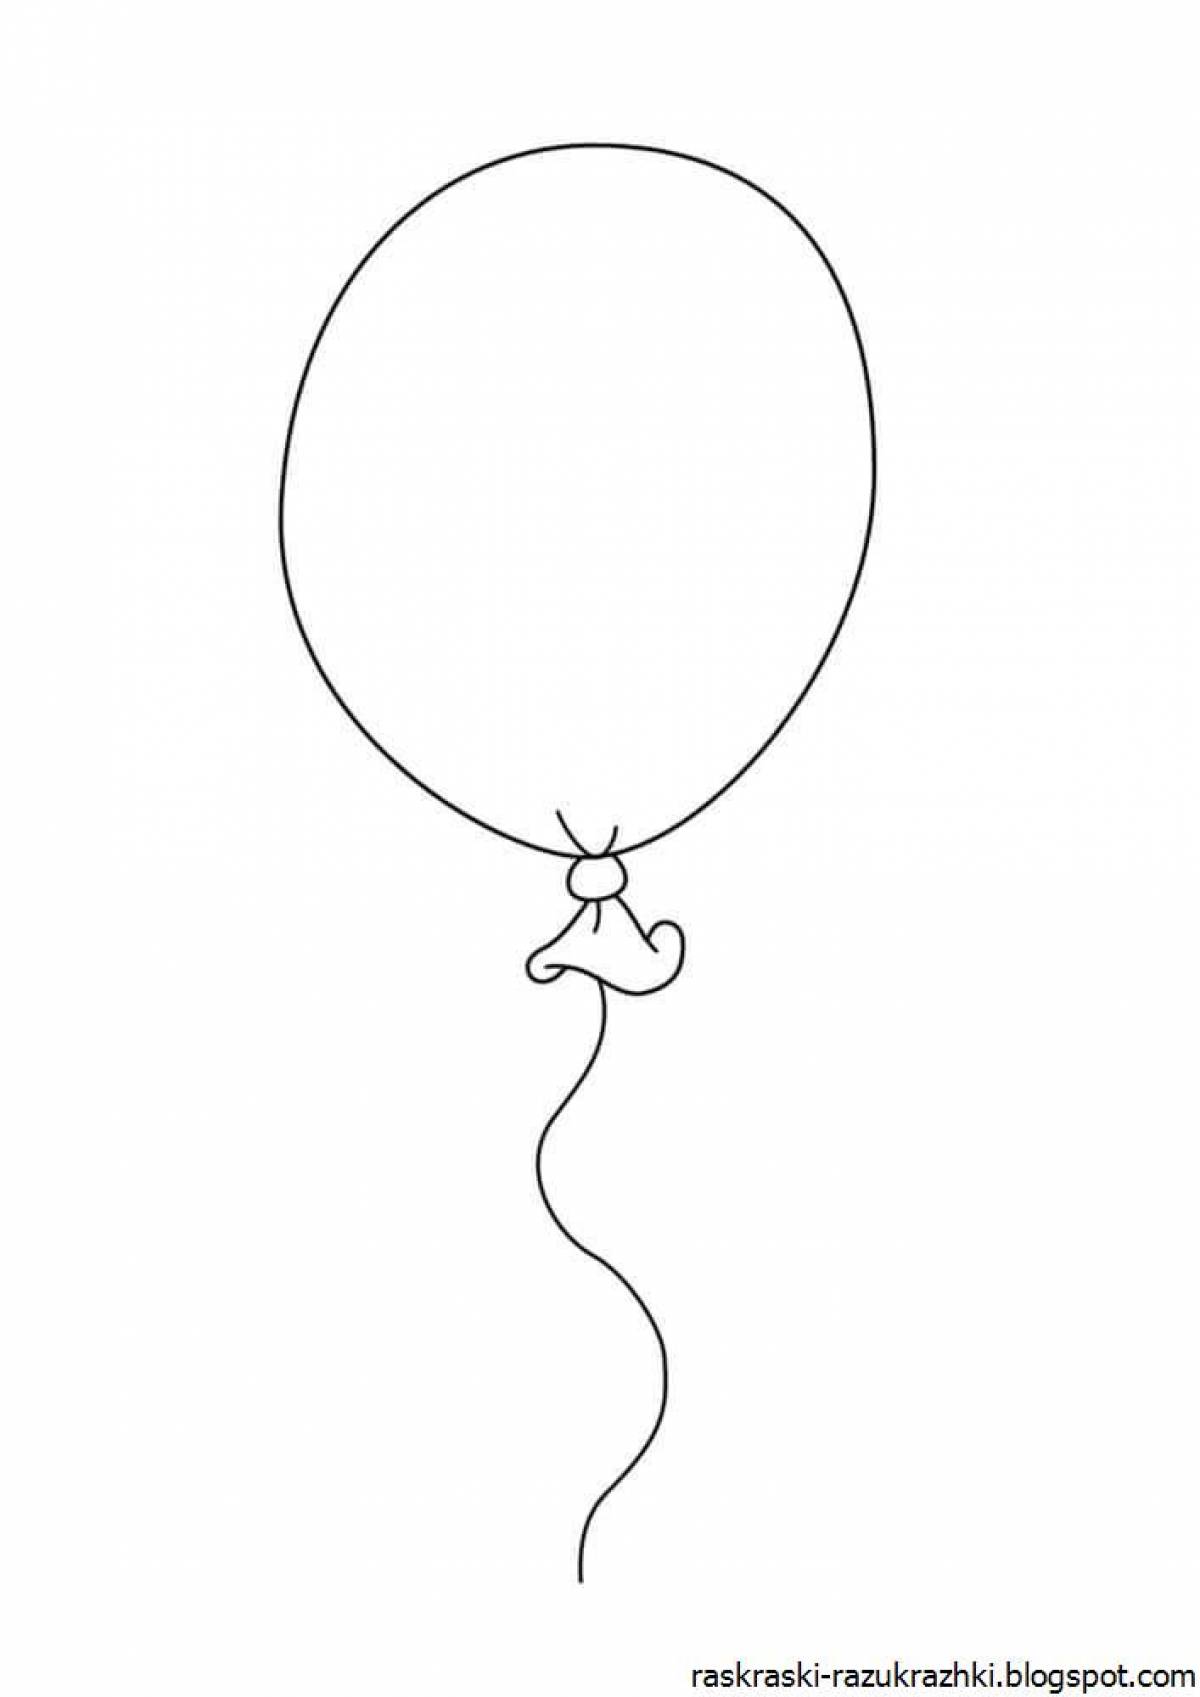 Color live balloons coloring book